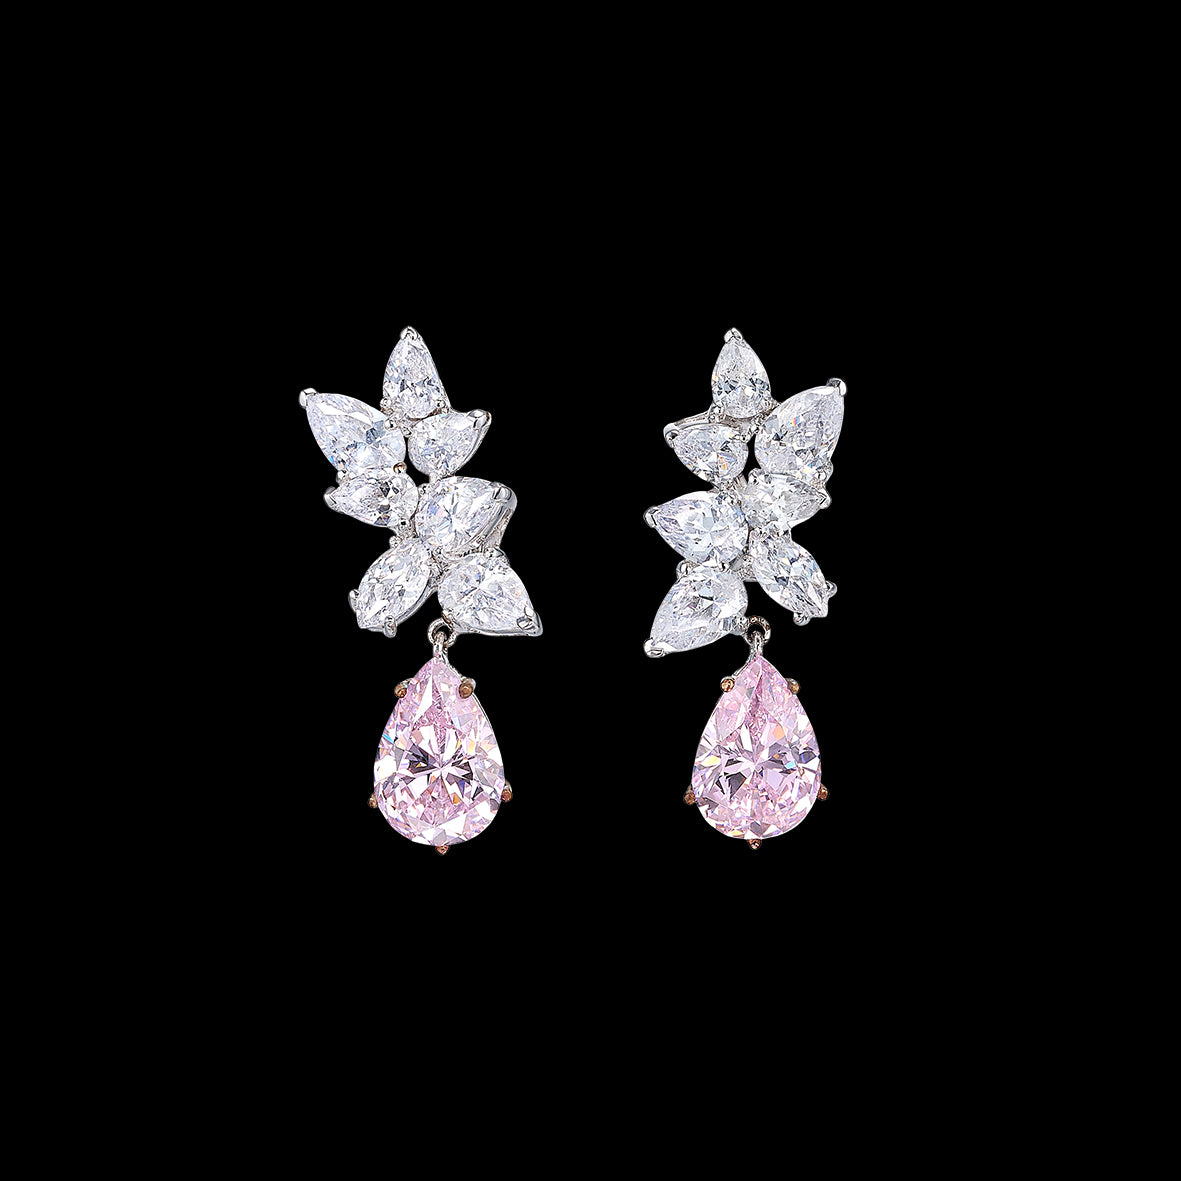 Lily Rose Cluster Earrings, Earrings, Anabela Chan Joaillerie - Fine jewelry with laboratory grown and created gemstones hand-crafted in the United Kingdom. Anabela Chan Joaillerie is the first fine jewellery brand in the world to champion laboratory-grown and created gemstones with high jewellery design, artisanal craftsmanship and a focus on ethical and sustainable innovations.